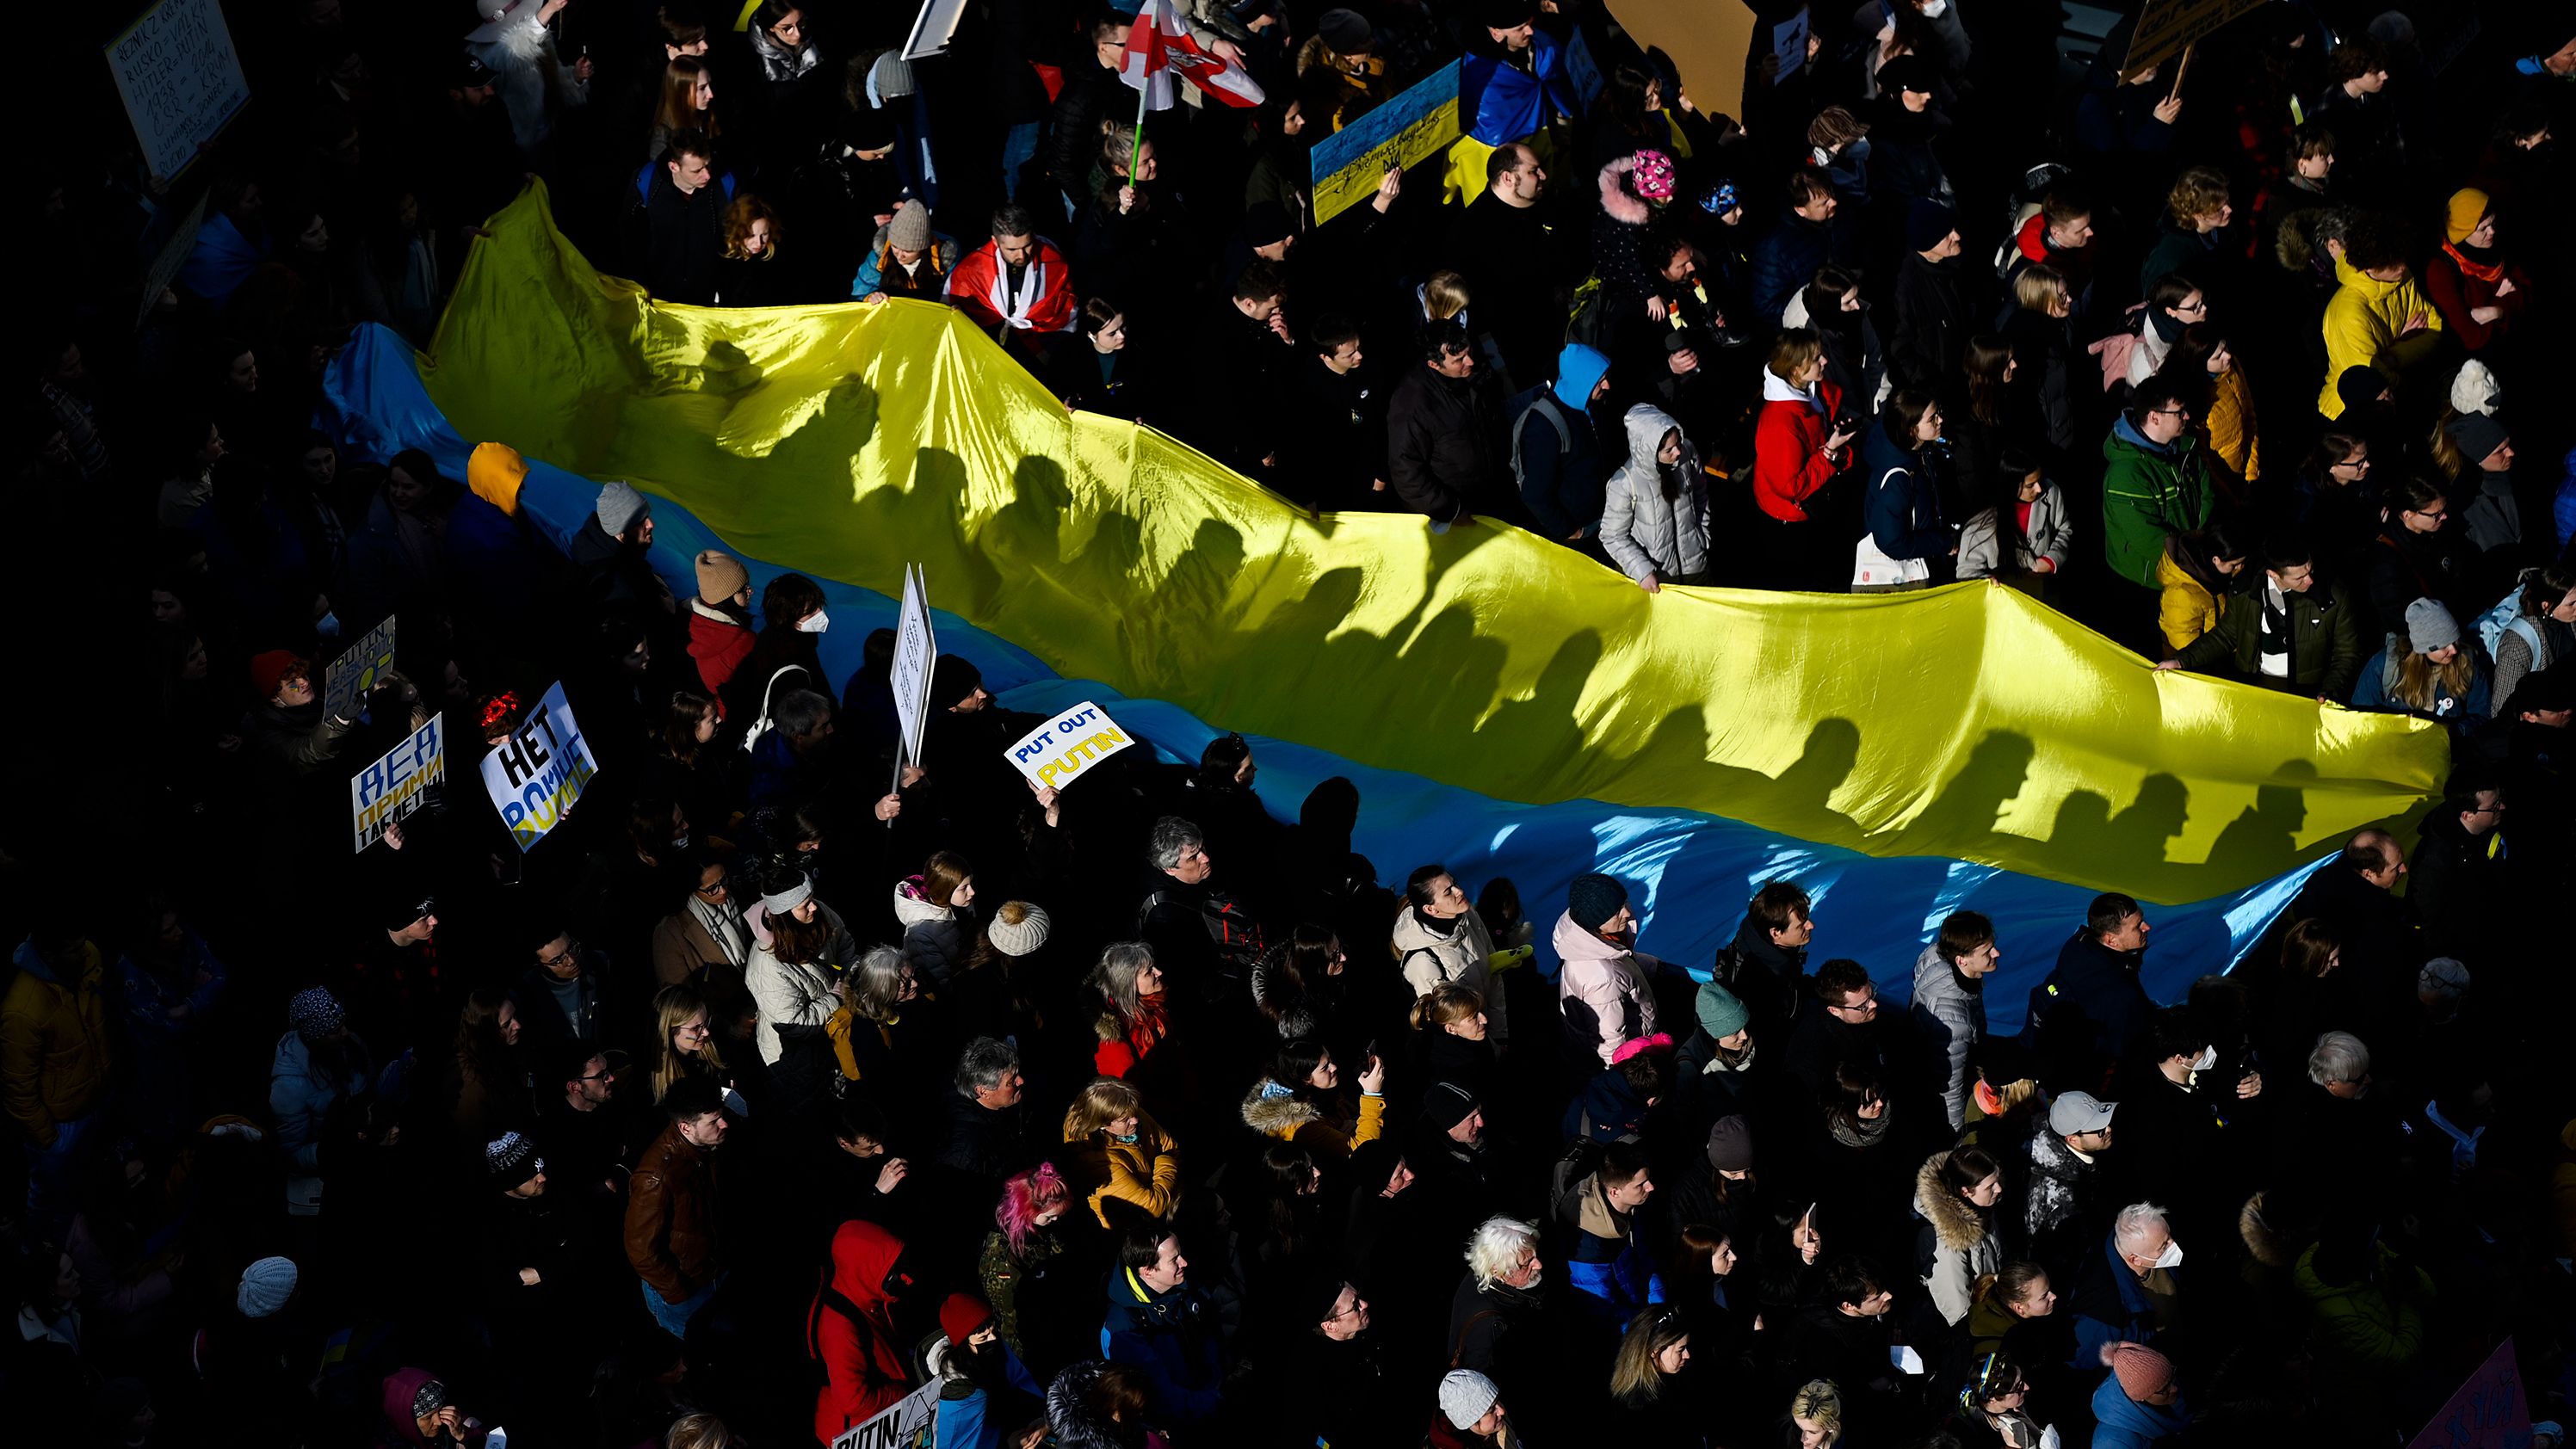 People gather for a demonstration in Prague, Czech Republic, on February 27. <a href="https://www.cnn.com/europe/live-news/ukraine-russia-news-02-27-22/h_6fdd49696f27d7f495309869ff0fac3a" target="_blank">The event in Prague</a> was particularly poignant given that many of its attendees experienced a Russian invasion firsthand. In 1968, Soviet-led armies of the Warsaw Pact invaded Czechoslovakia, crushing the so-called Prague Spring democratic reform movement and restoring the totalitarian communist regime. The troops stayed in Czechoslovakia for over two decades, with the last leaving in 1991.